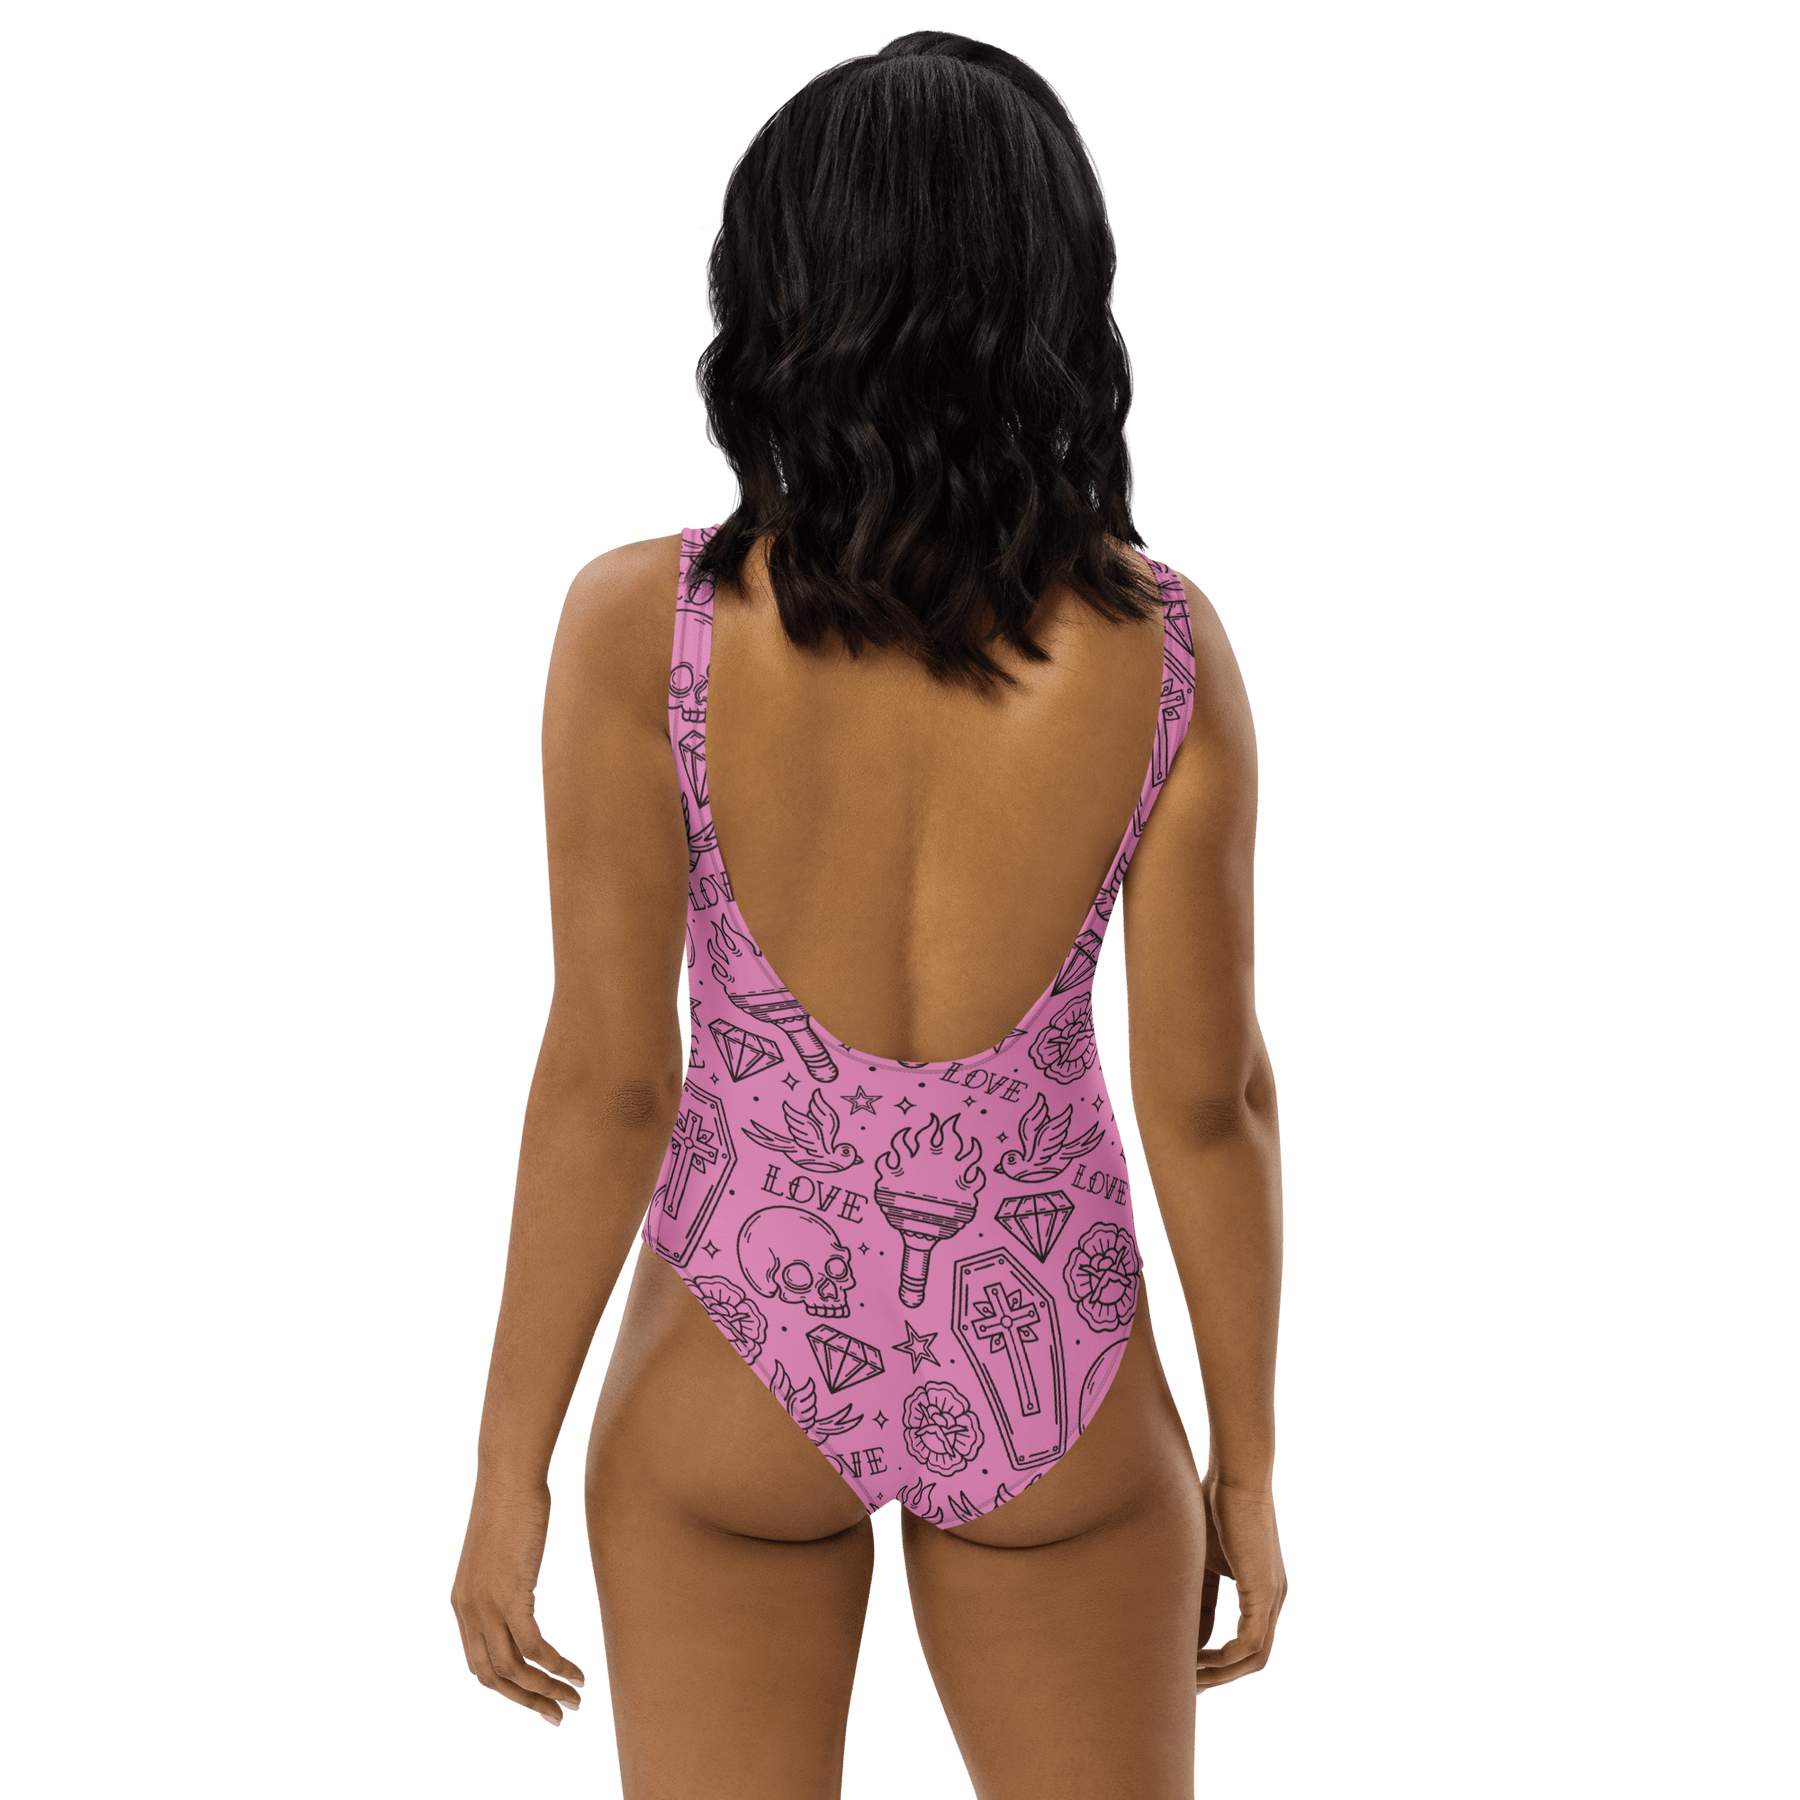 Punk in Pink One-Piece Swimsuit - Goth Cloth Co.4379401_9014